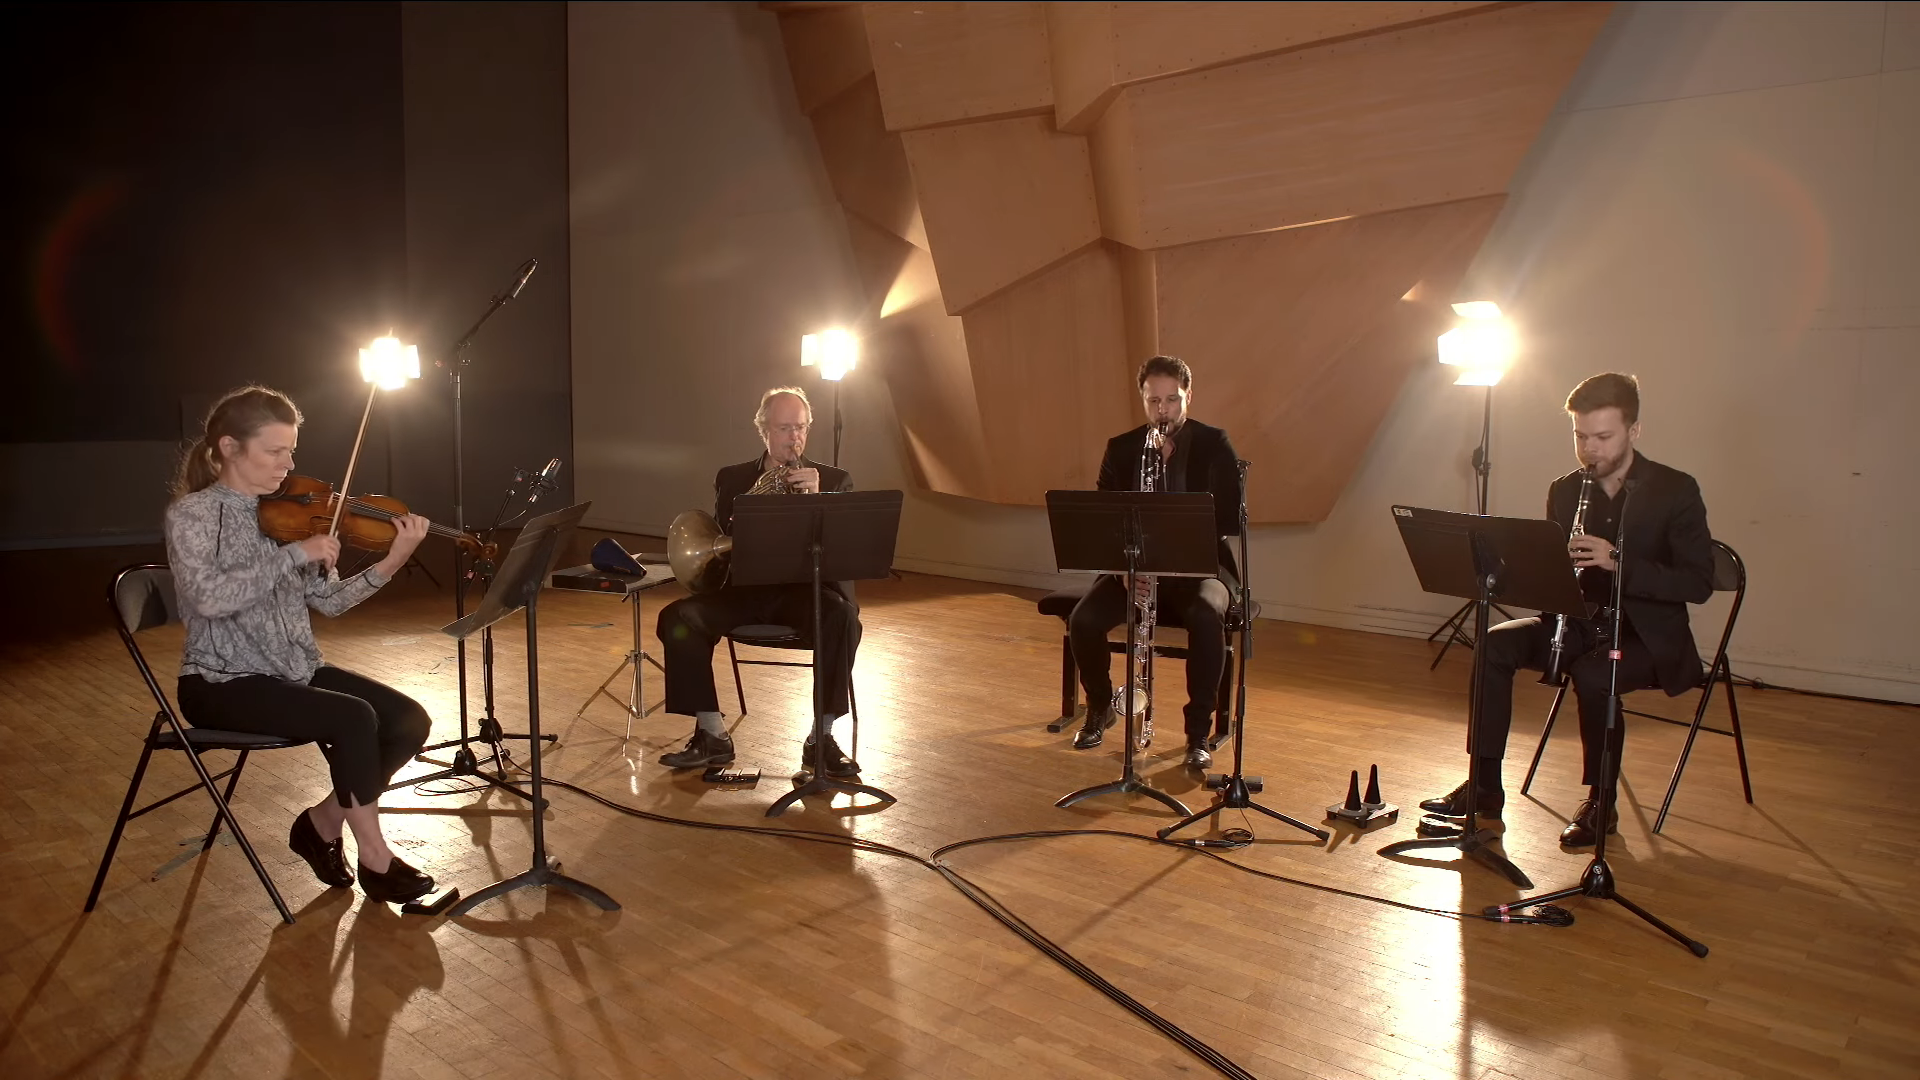 Four musicians, seated, play a chamber music piece